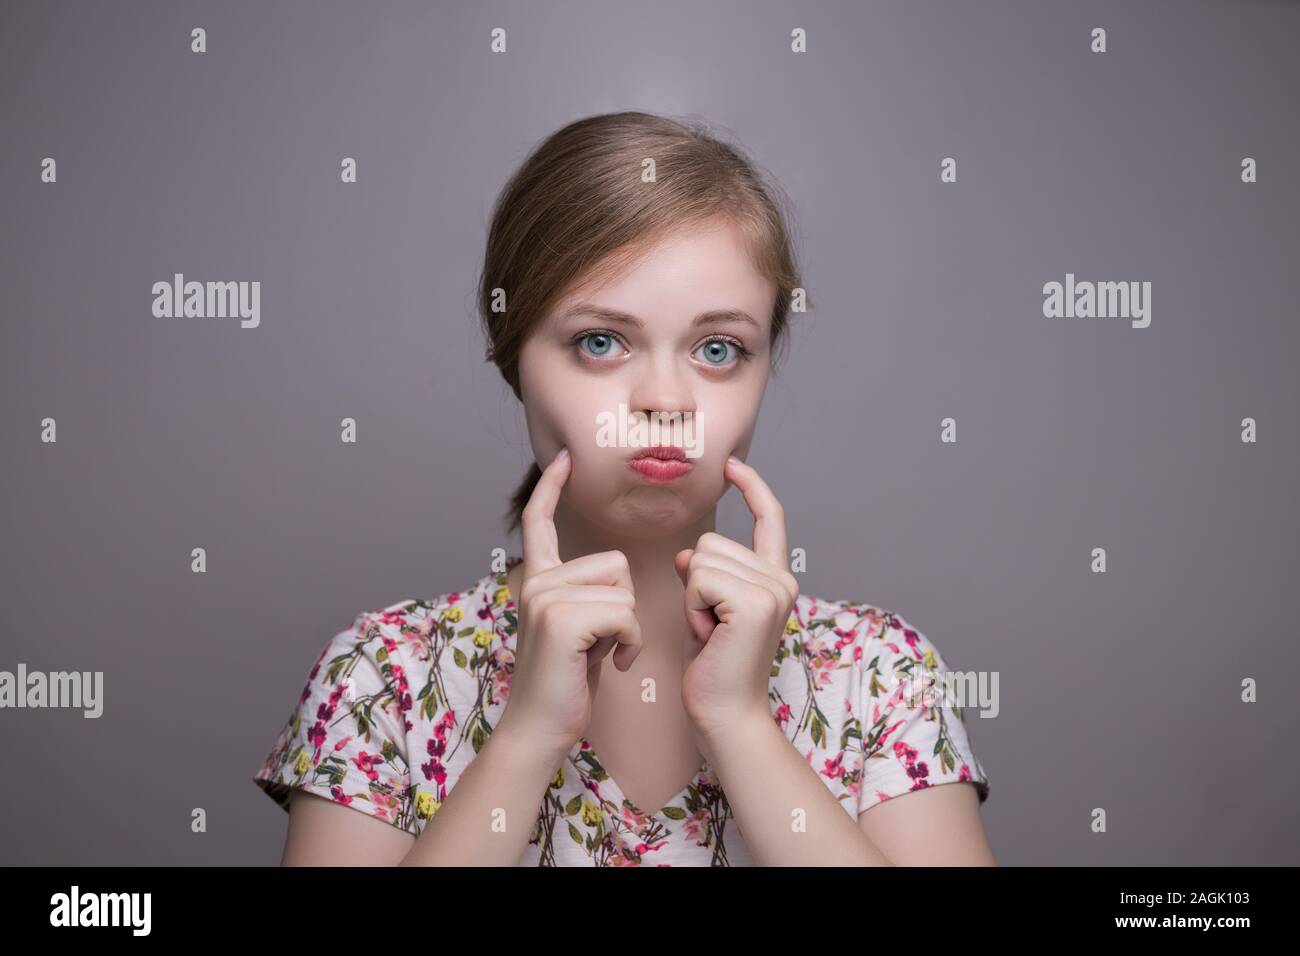 Young chubby caucasian woman girl with chubby cheeks Stock Photo